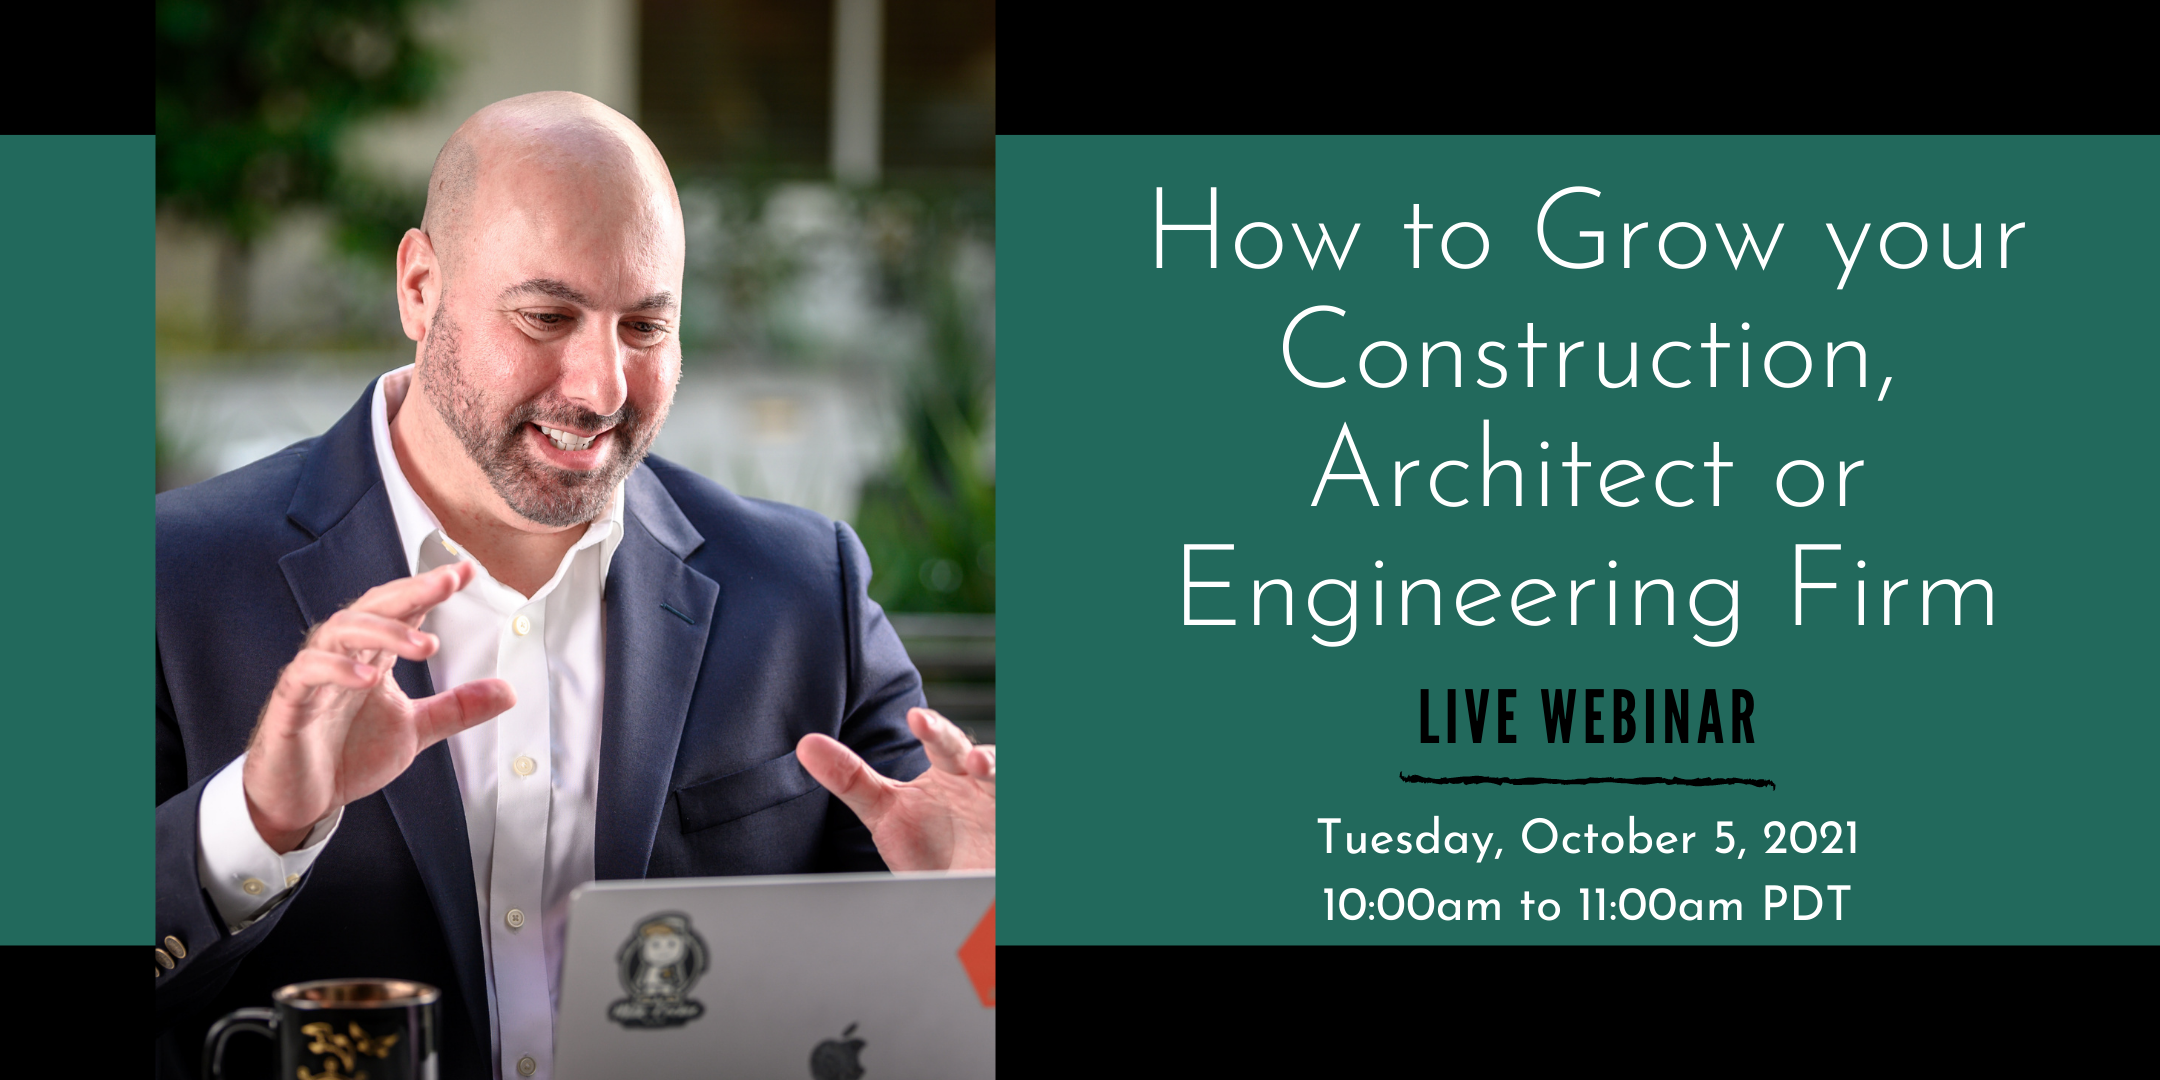 Webinar How to Grow your Construction, Architect or Engineering Firm